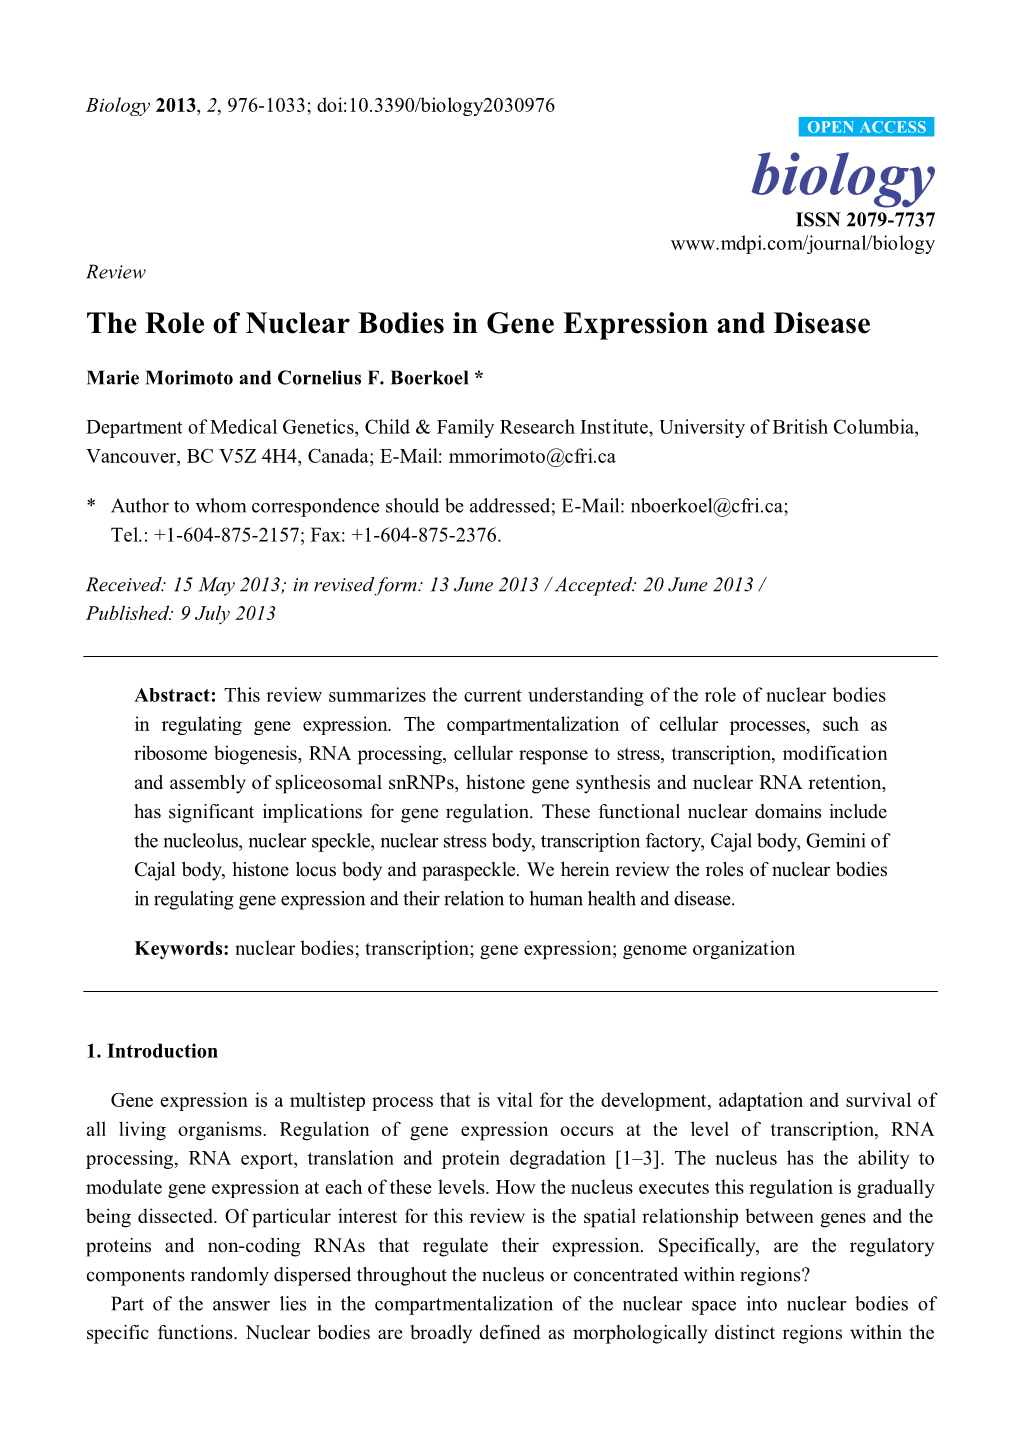 The Role of Nuclear Bodies in Gene Expression and Disease